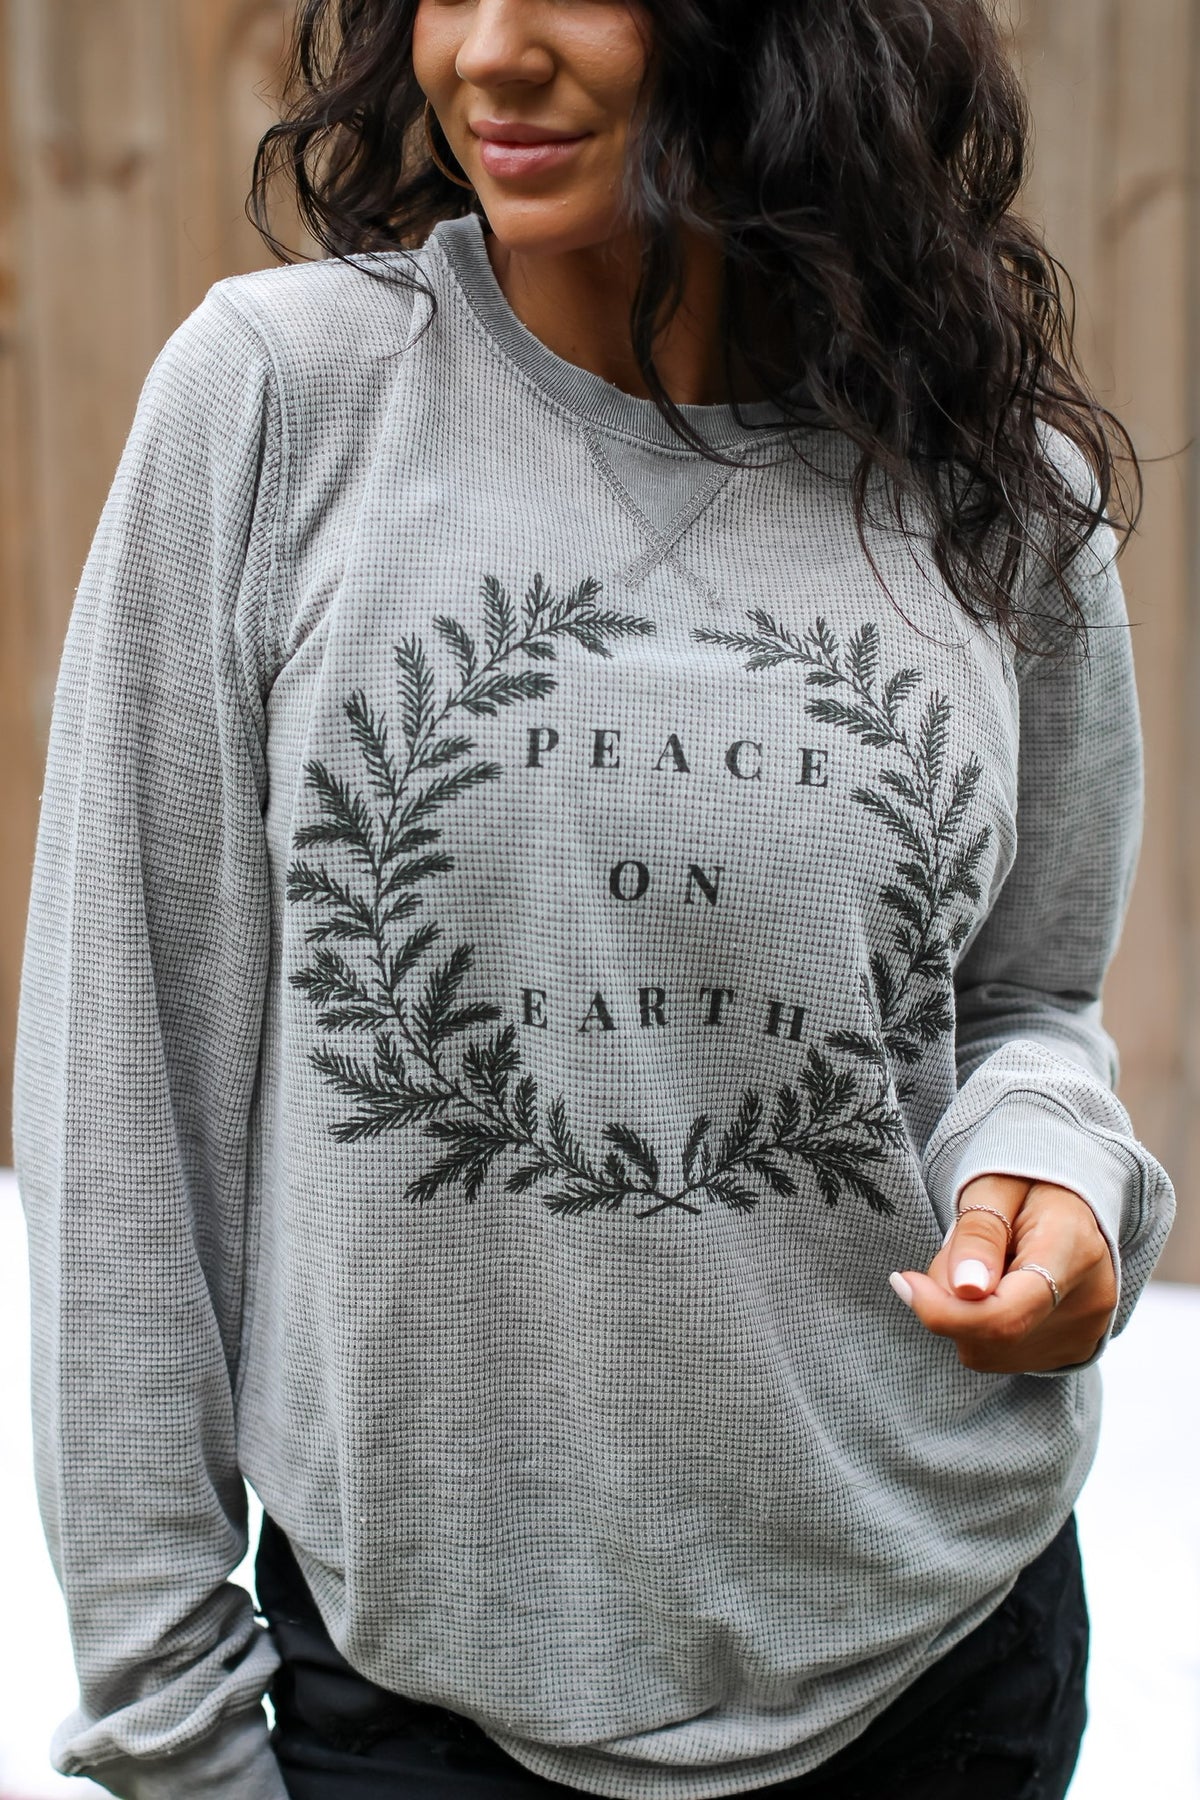 Peace on Earth Thermal Graphic Tee